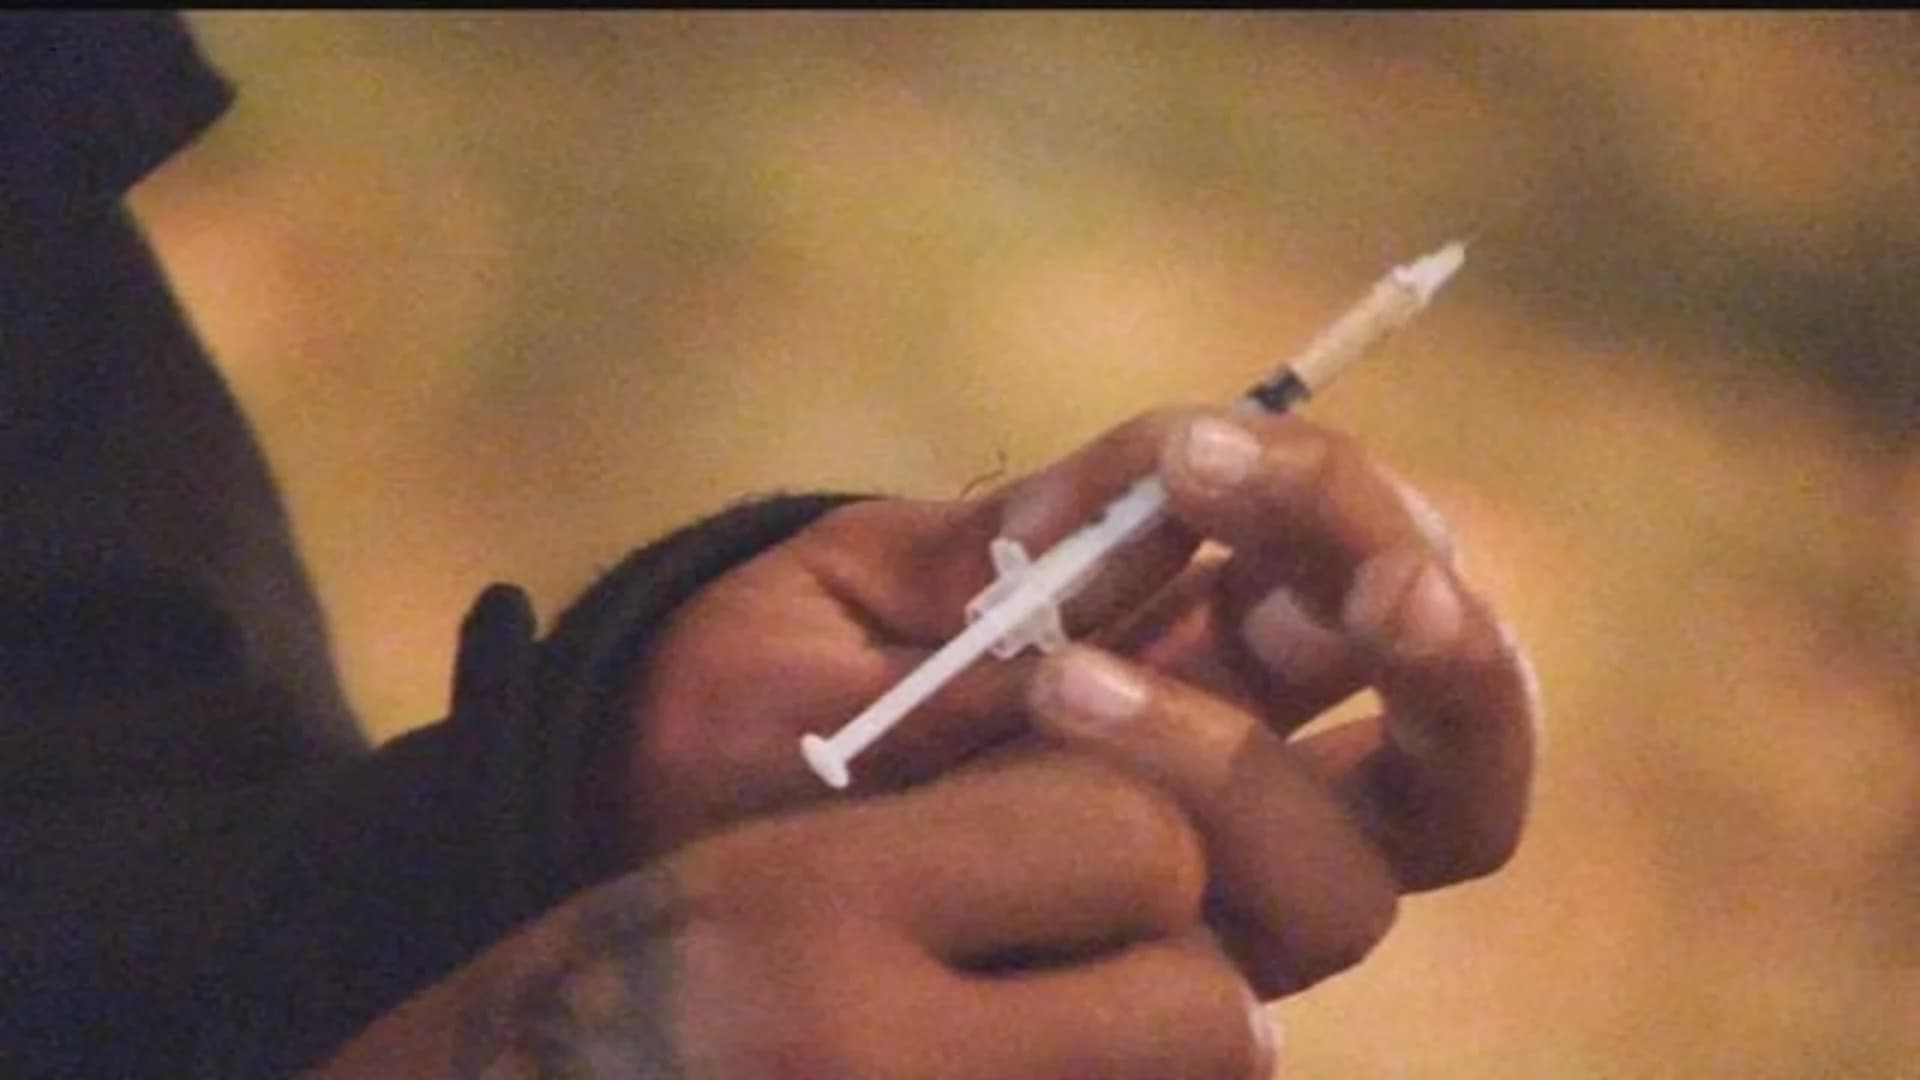 Medical examiner: Fentanyl-related overdose deaths up 12 percent in CT